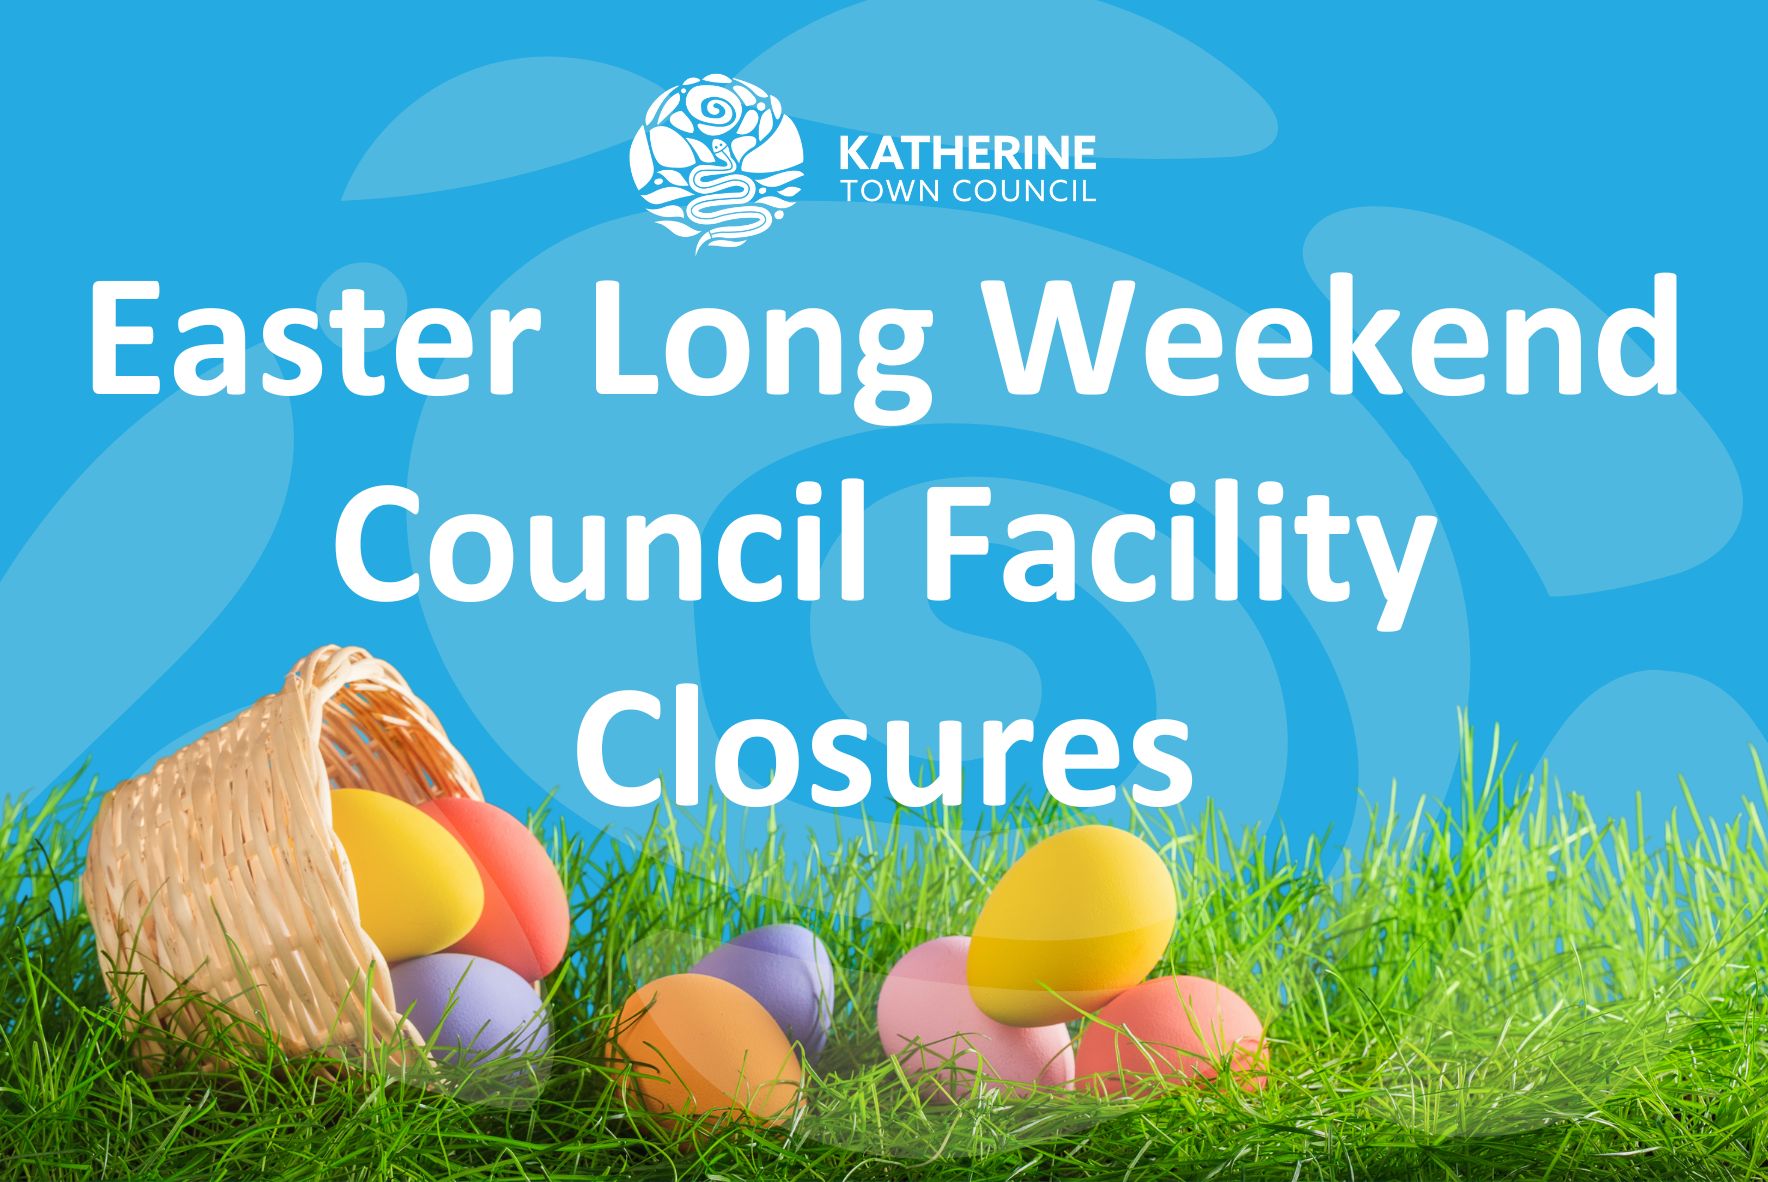 Easter long weekend council facility closures